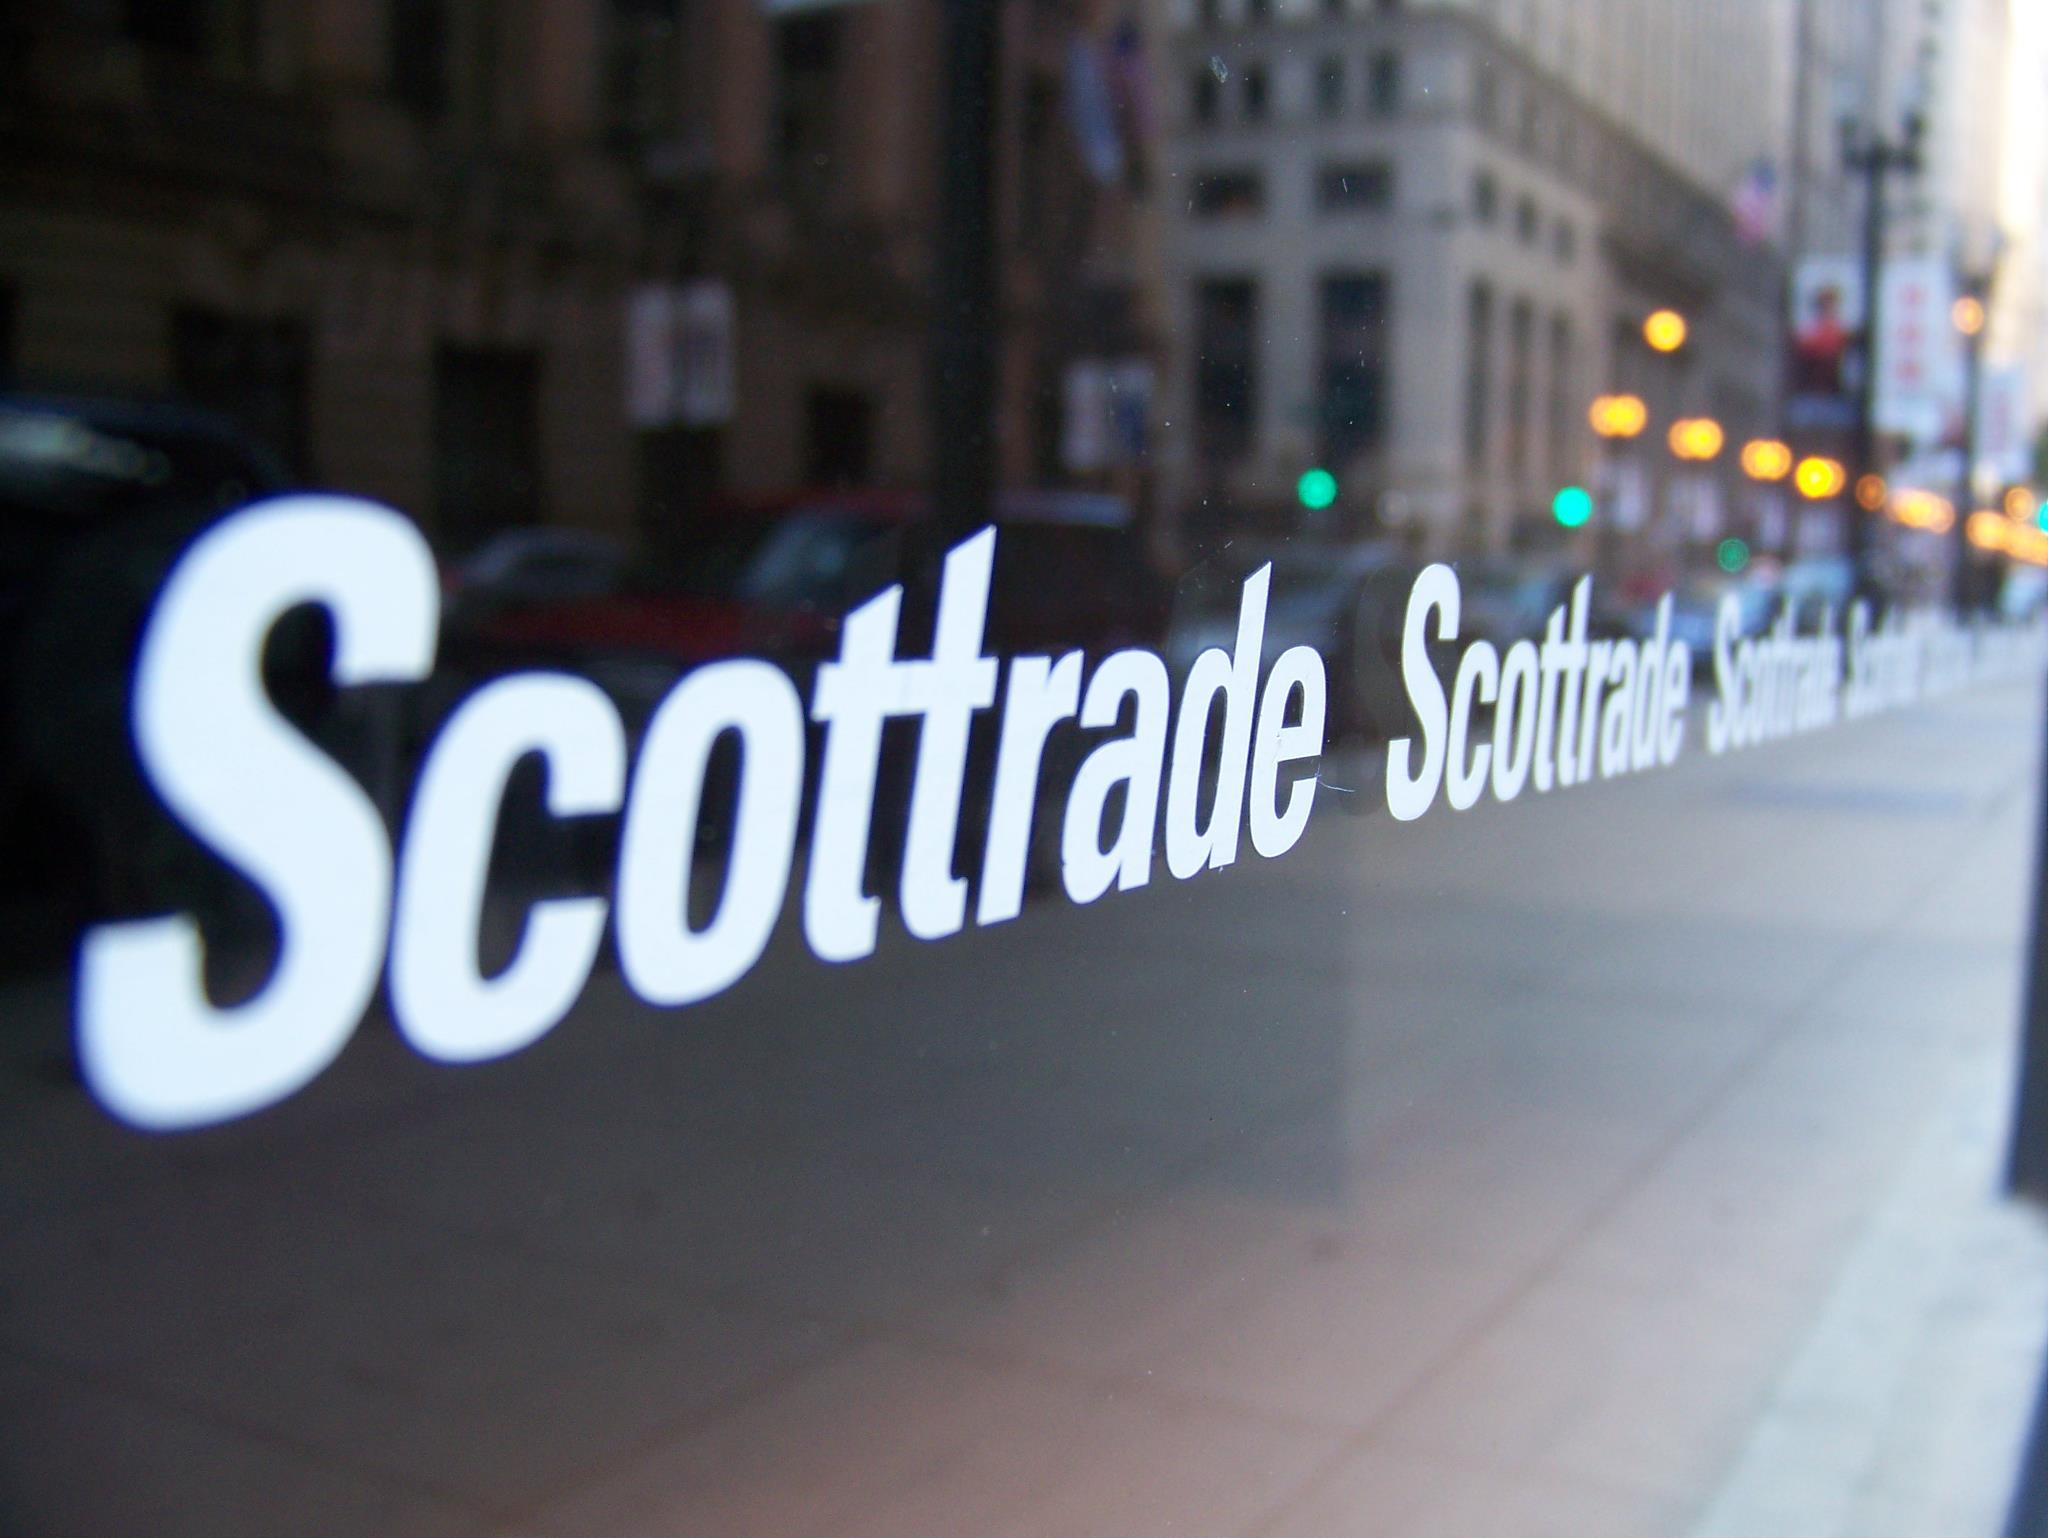 Scottrade to be sold to TD Ameritrade in $4 billion deal ...